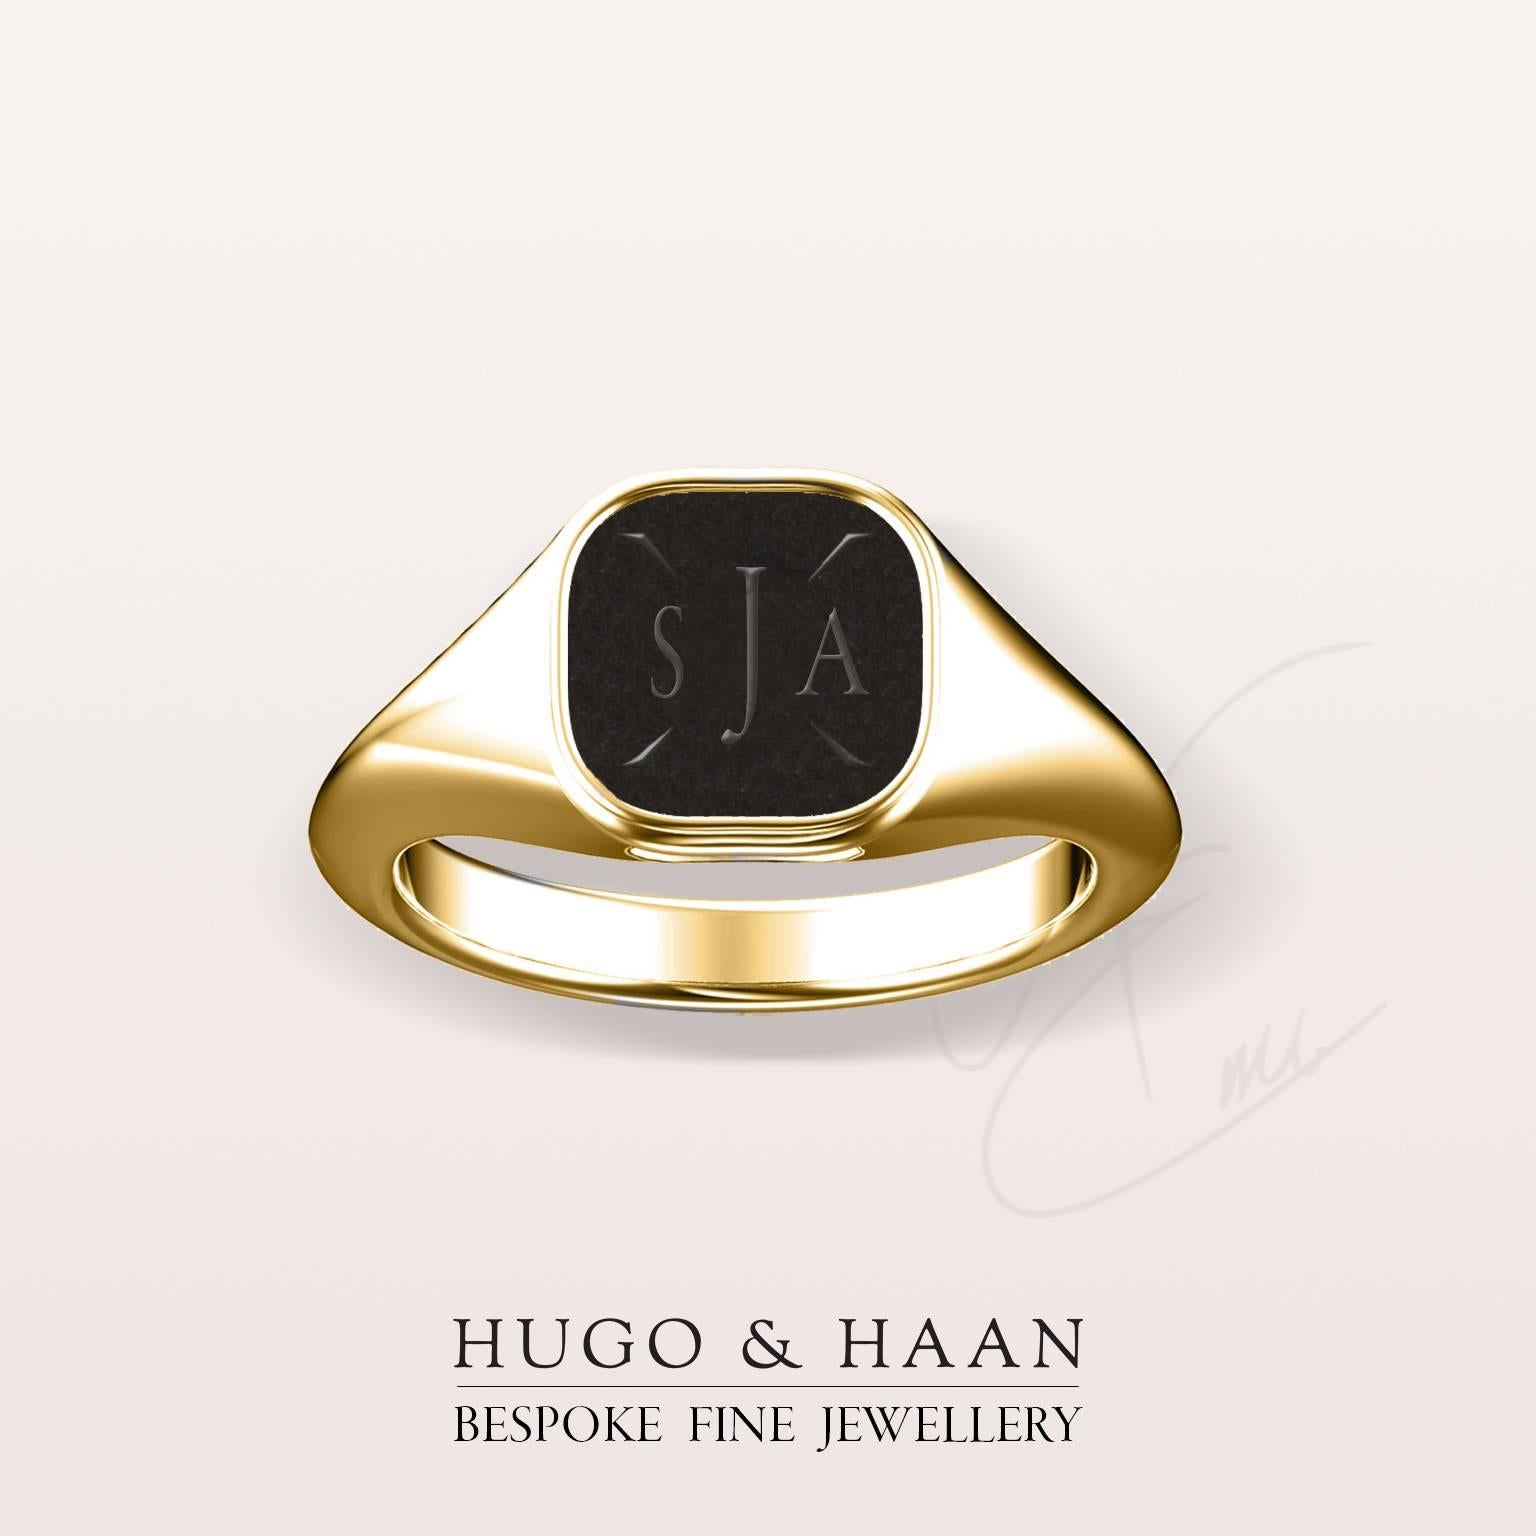 Details:

Material : 18k Yellow Gold
Principle Gemstone : Black Agate
Other Gemstone : -
Customizable: Yes

Options to customize: 

Metals available : Platinum, 18kt Yellow Gold or 18kt White Gold
Gemstones Available : All that can be carved and is